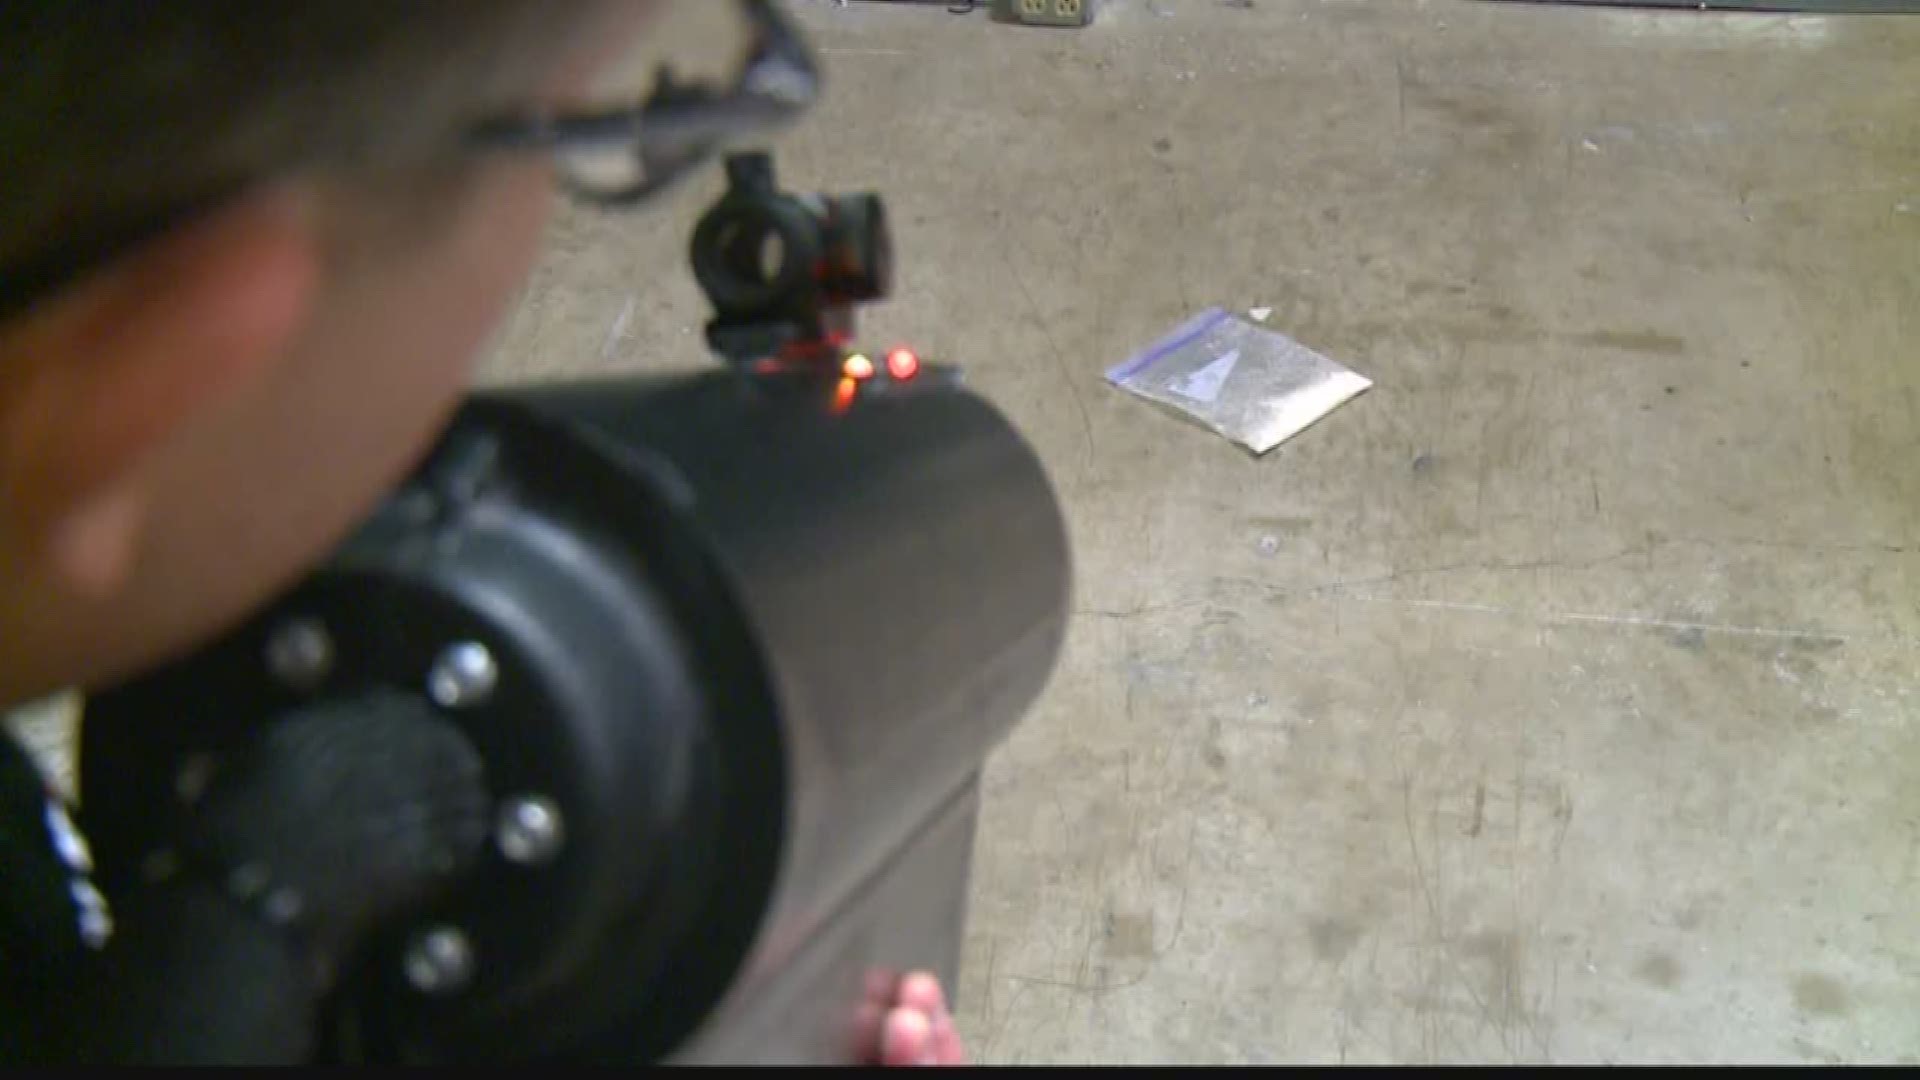 A defense contractor says its invention may save law enforcement lives.